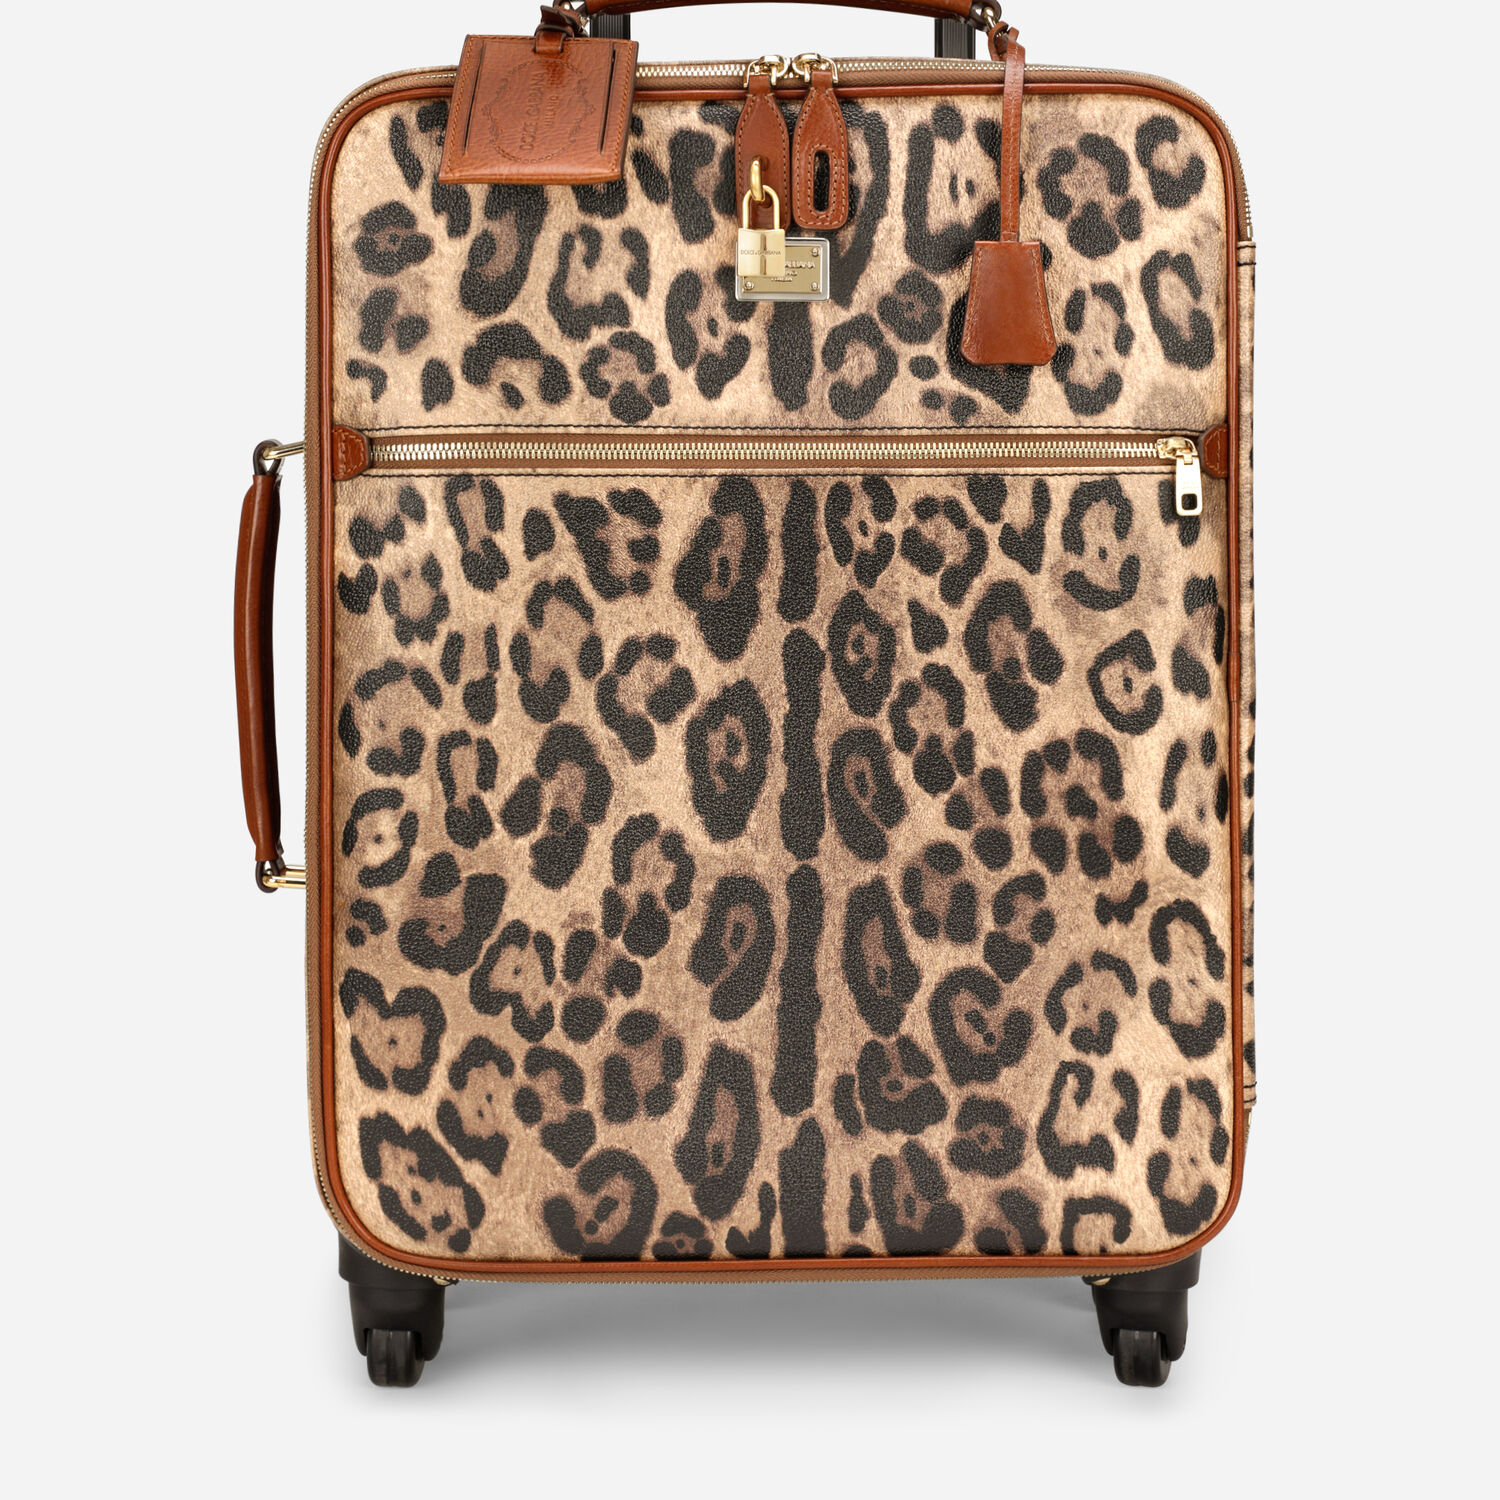 Dolce & Gabbana Medium Travel Bag in Leopard-Print Crespo with Branded Plate - Brown